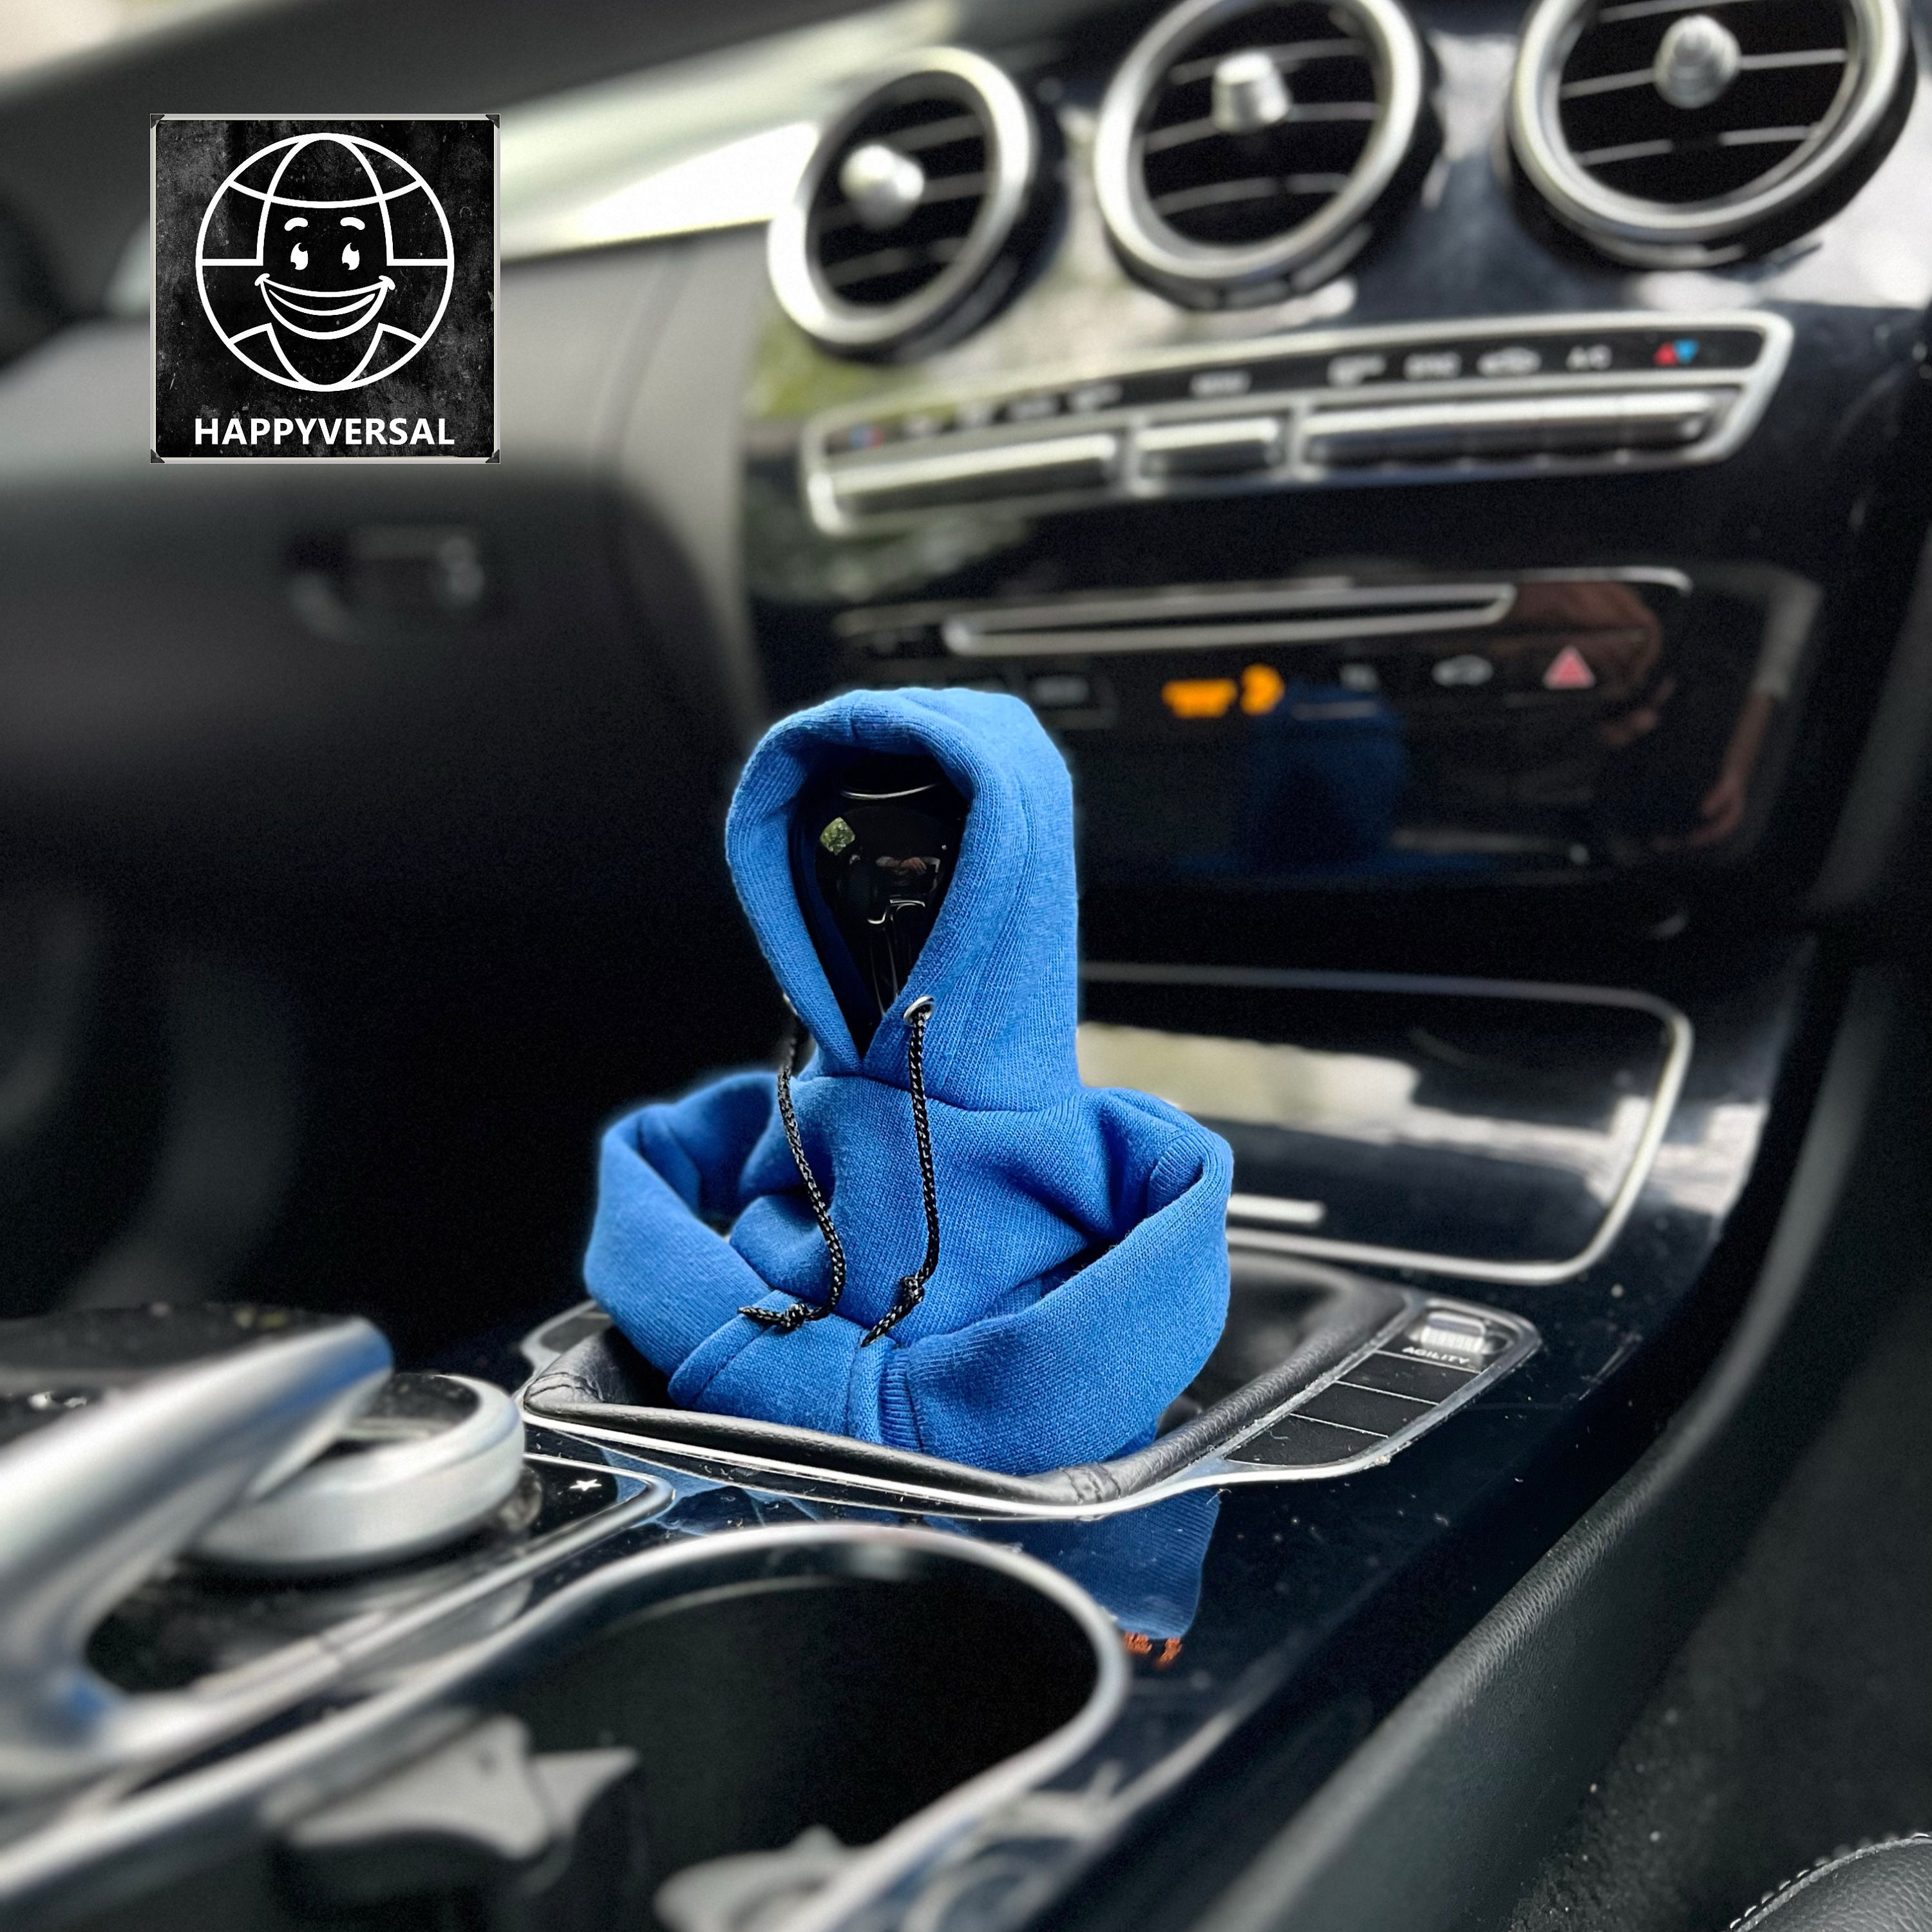 Luckxing Auto Gear Shift Cover Hoodie,Lustiger Pullover-Hoodie für  Auto-Shifter | Verstellbare Auto-Schalthebelabdeckung,  Schalthebelabdeckung